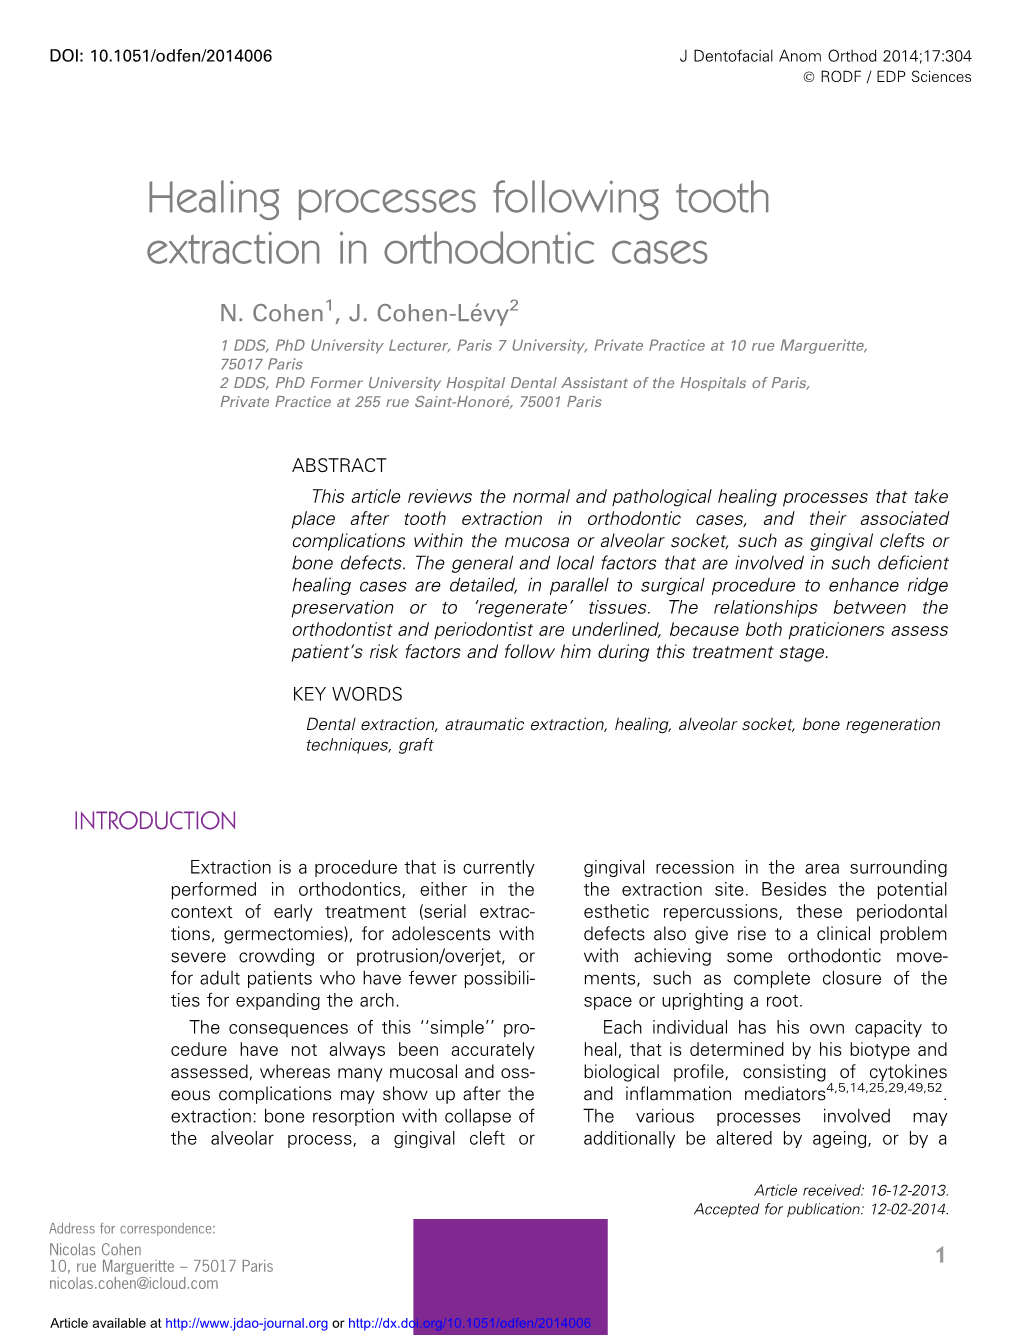 Healing Processes Following Tooth Extraction in Orthodontic Cases